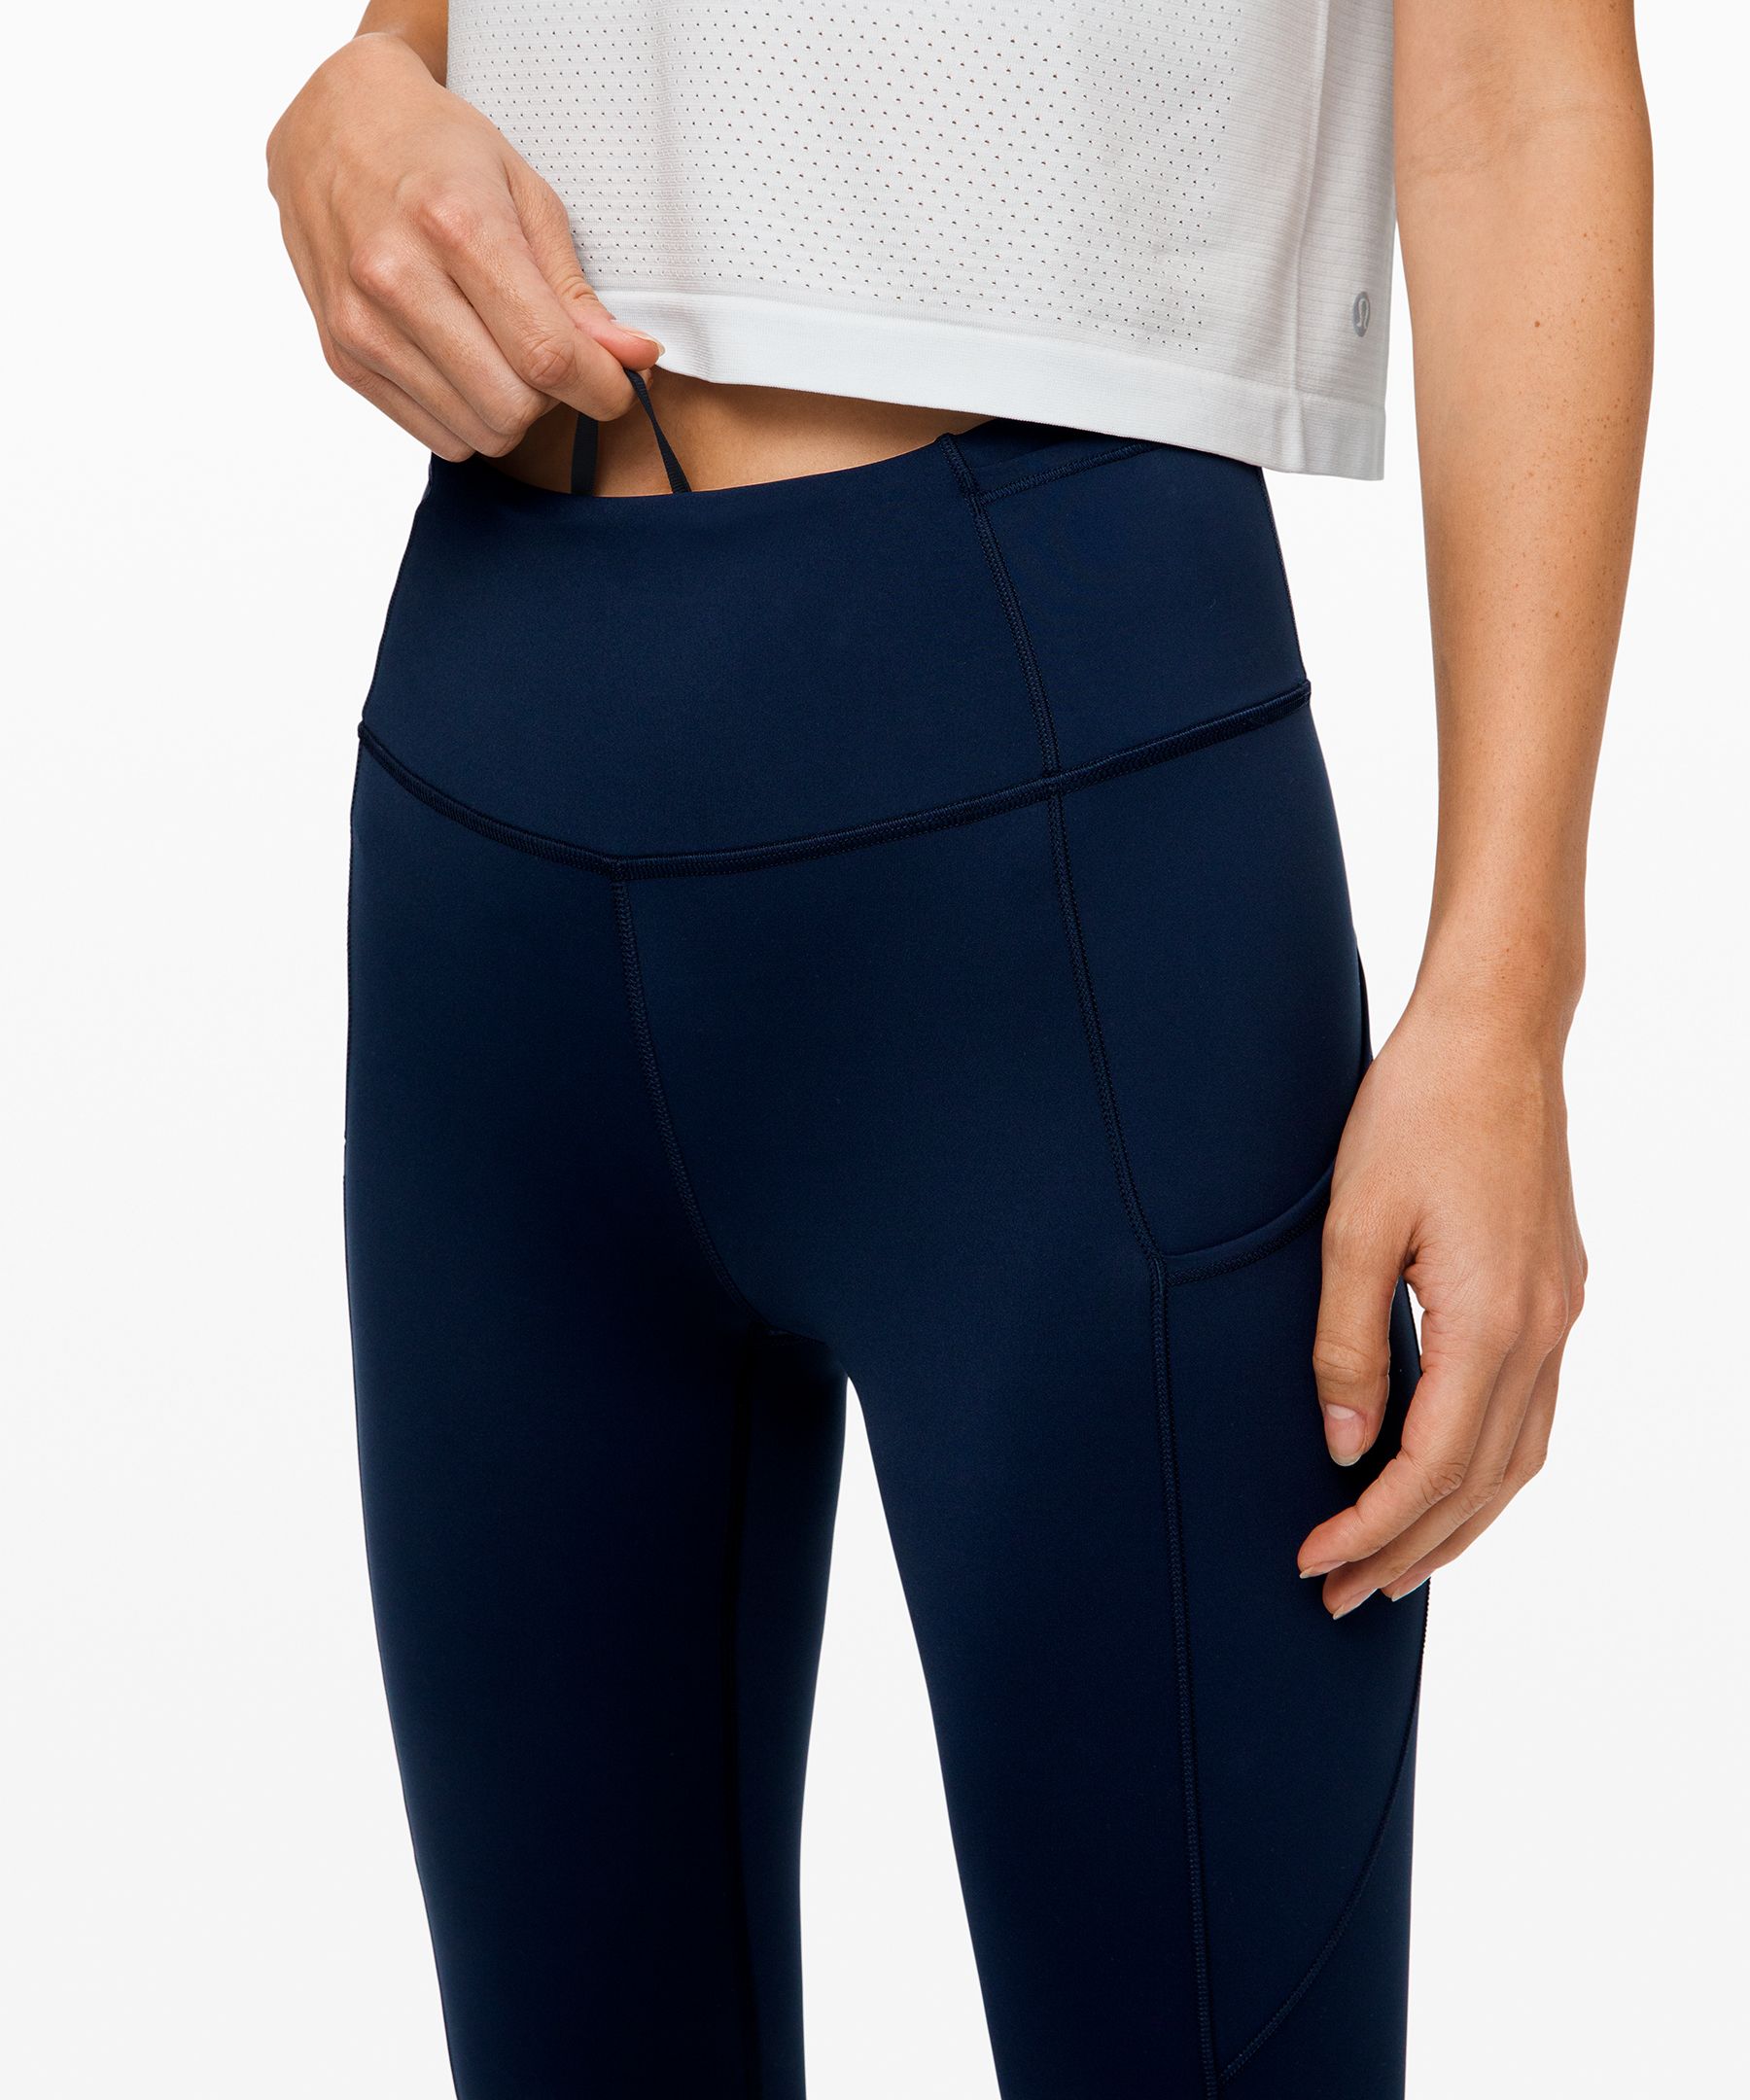 Lululemon Fast And Free Crop Ii 19 *nulux In Nocturnal Teal